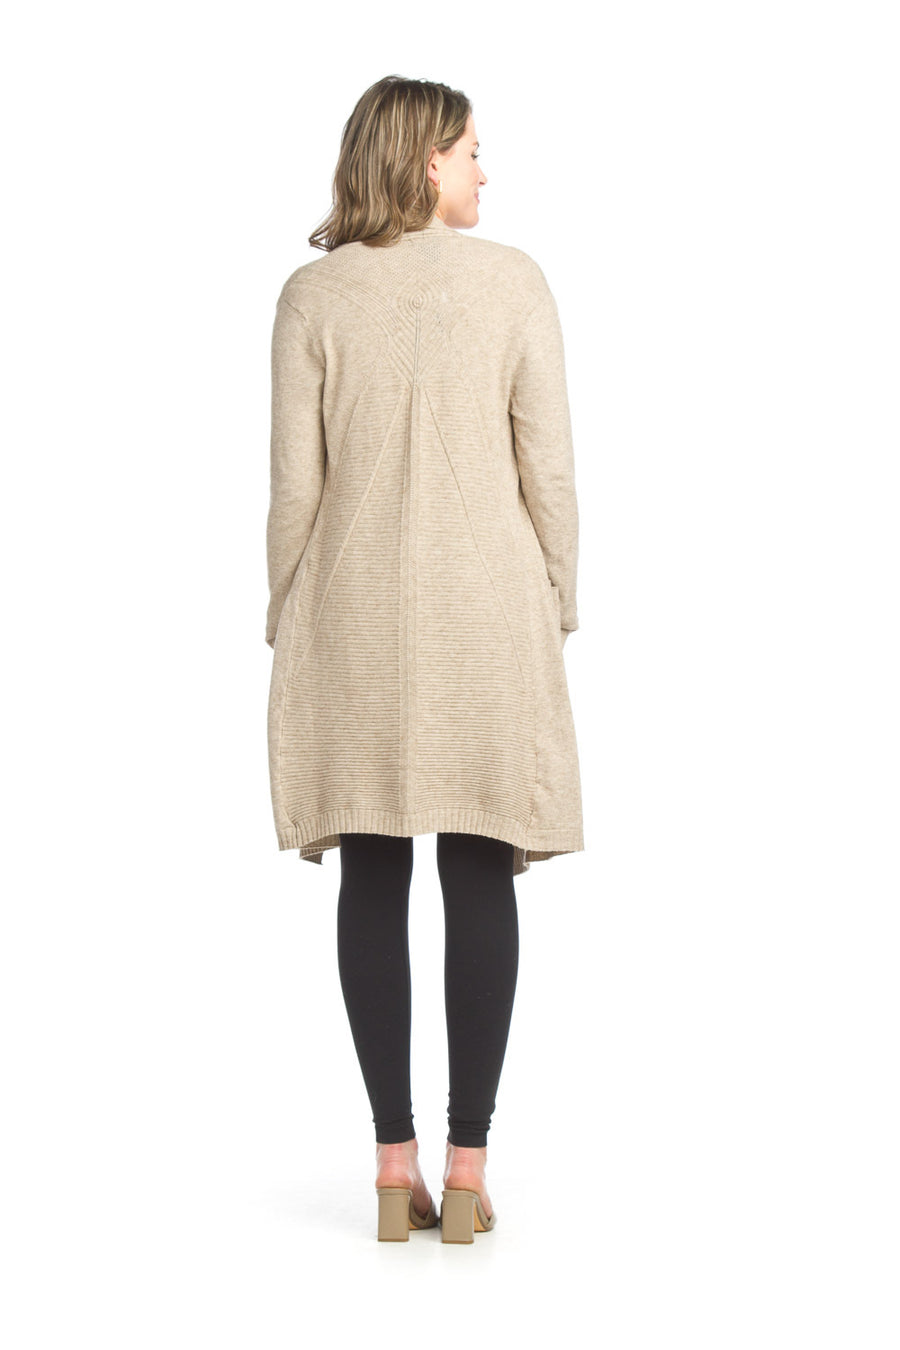 Papillon PT-13303 Ribbed Pointelle Cardigan - Taupe